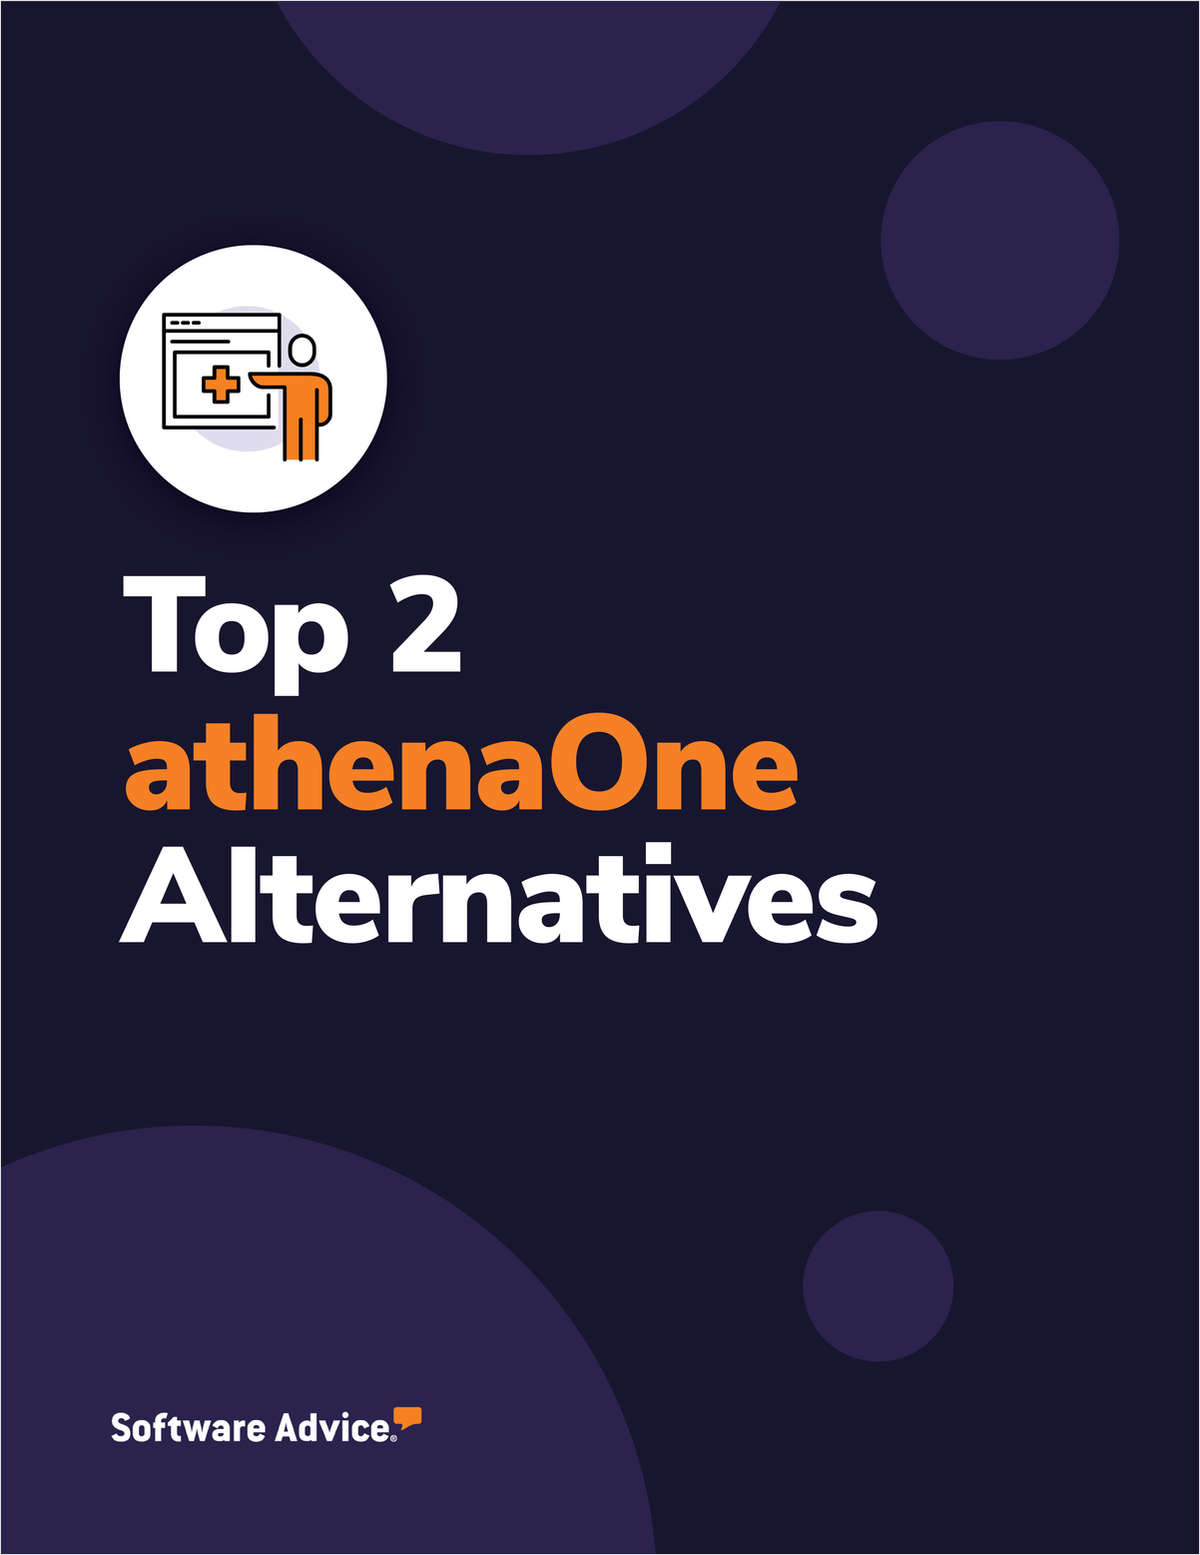 Compare athenaOne Against Top 2 Alternatives: Features, Ratings and Reviews